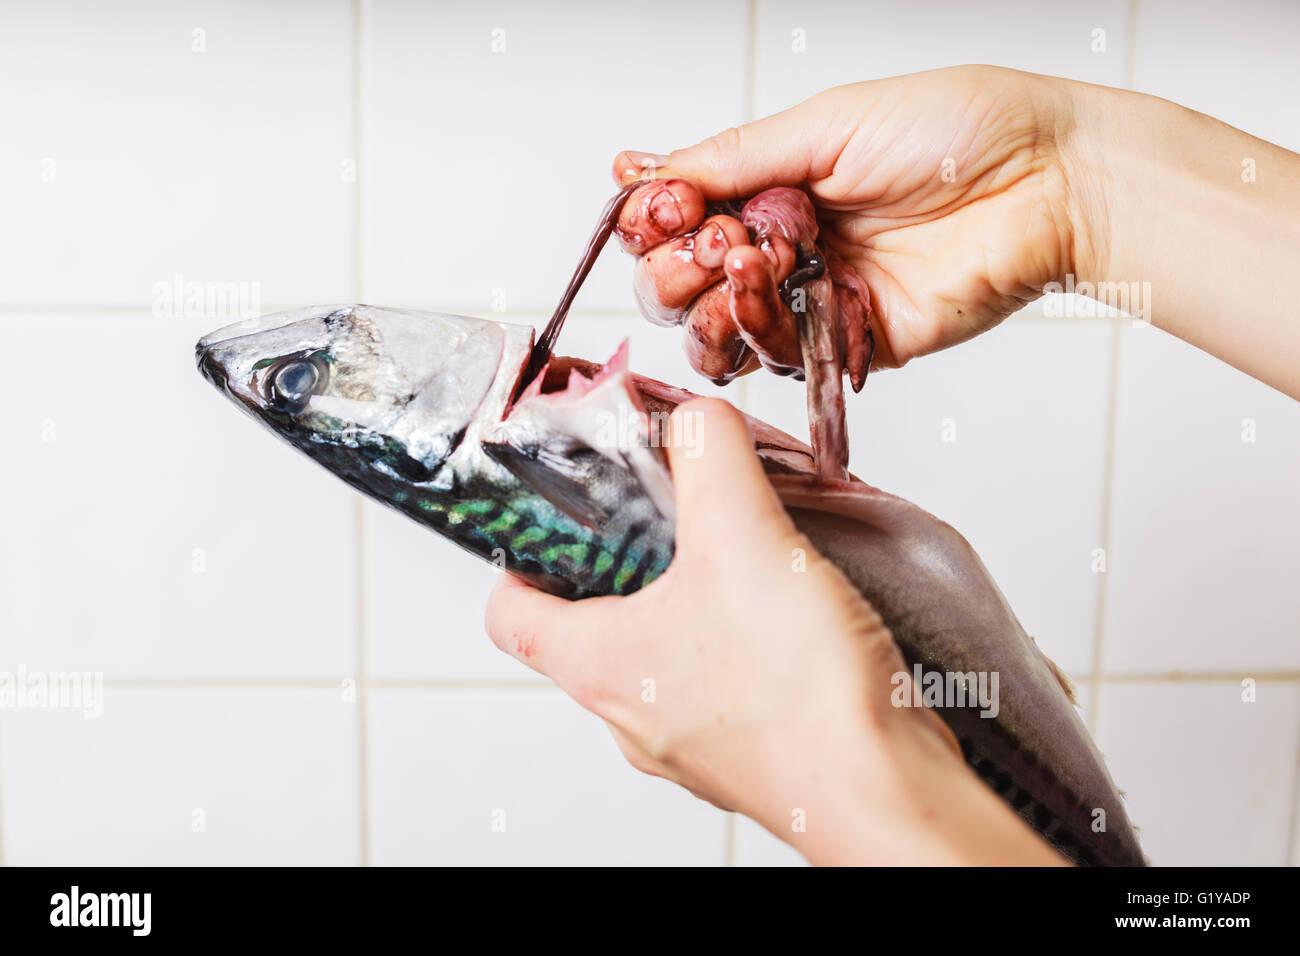 Close up on the hands of a young woman as she is gutting and cleaning a fish in the kitchen Stock Photo